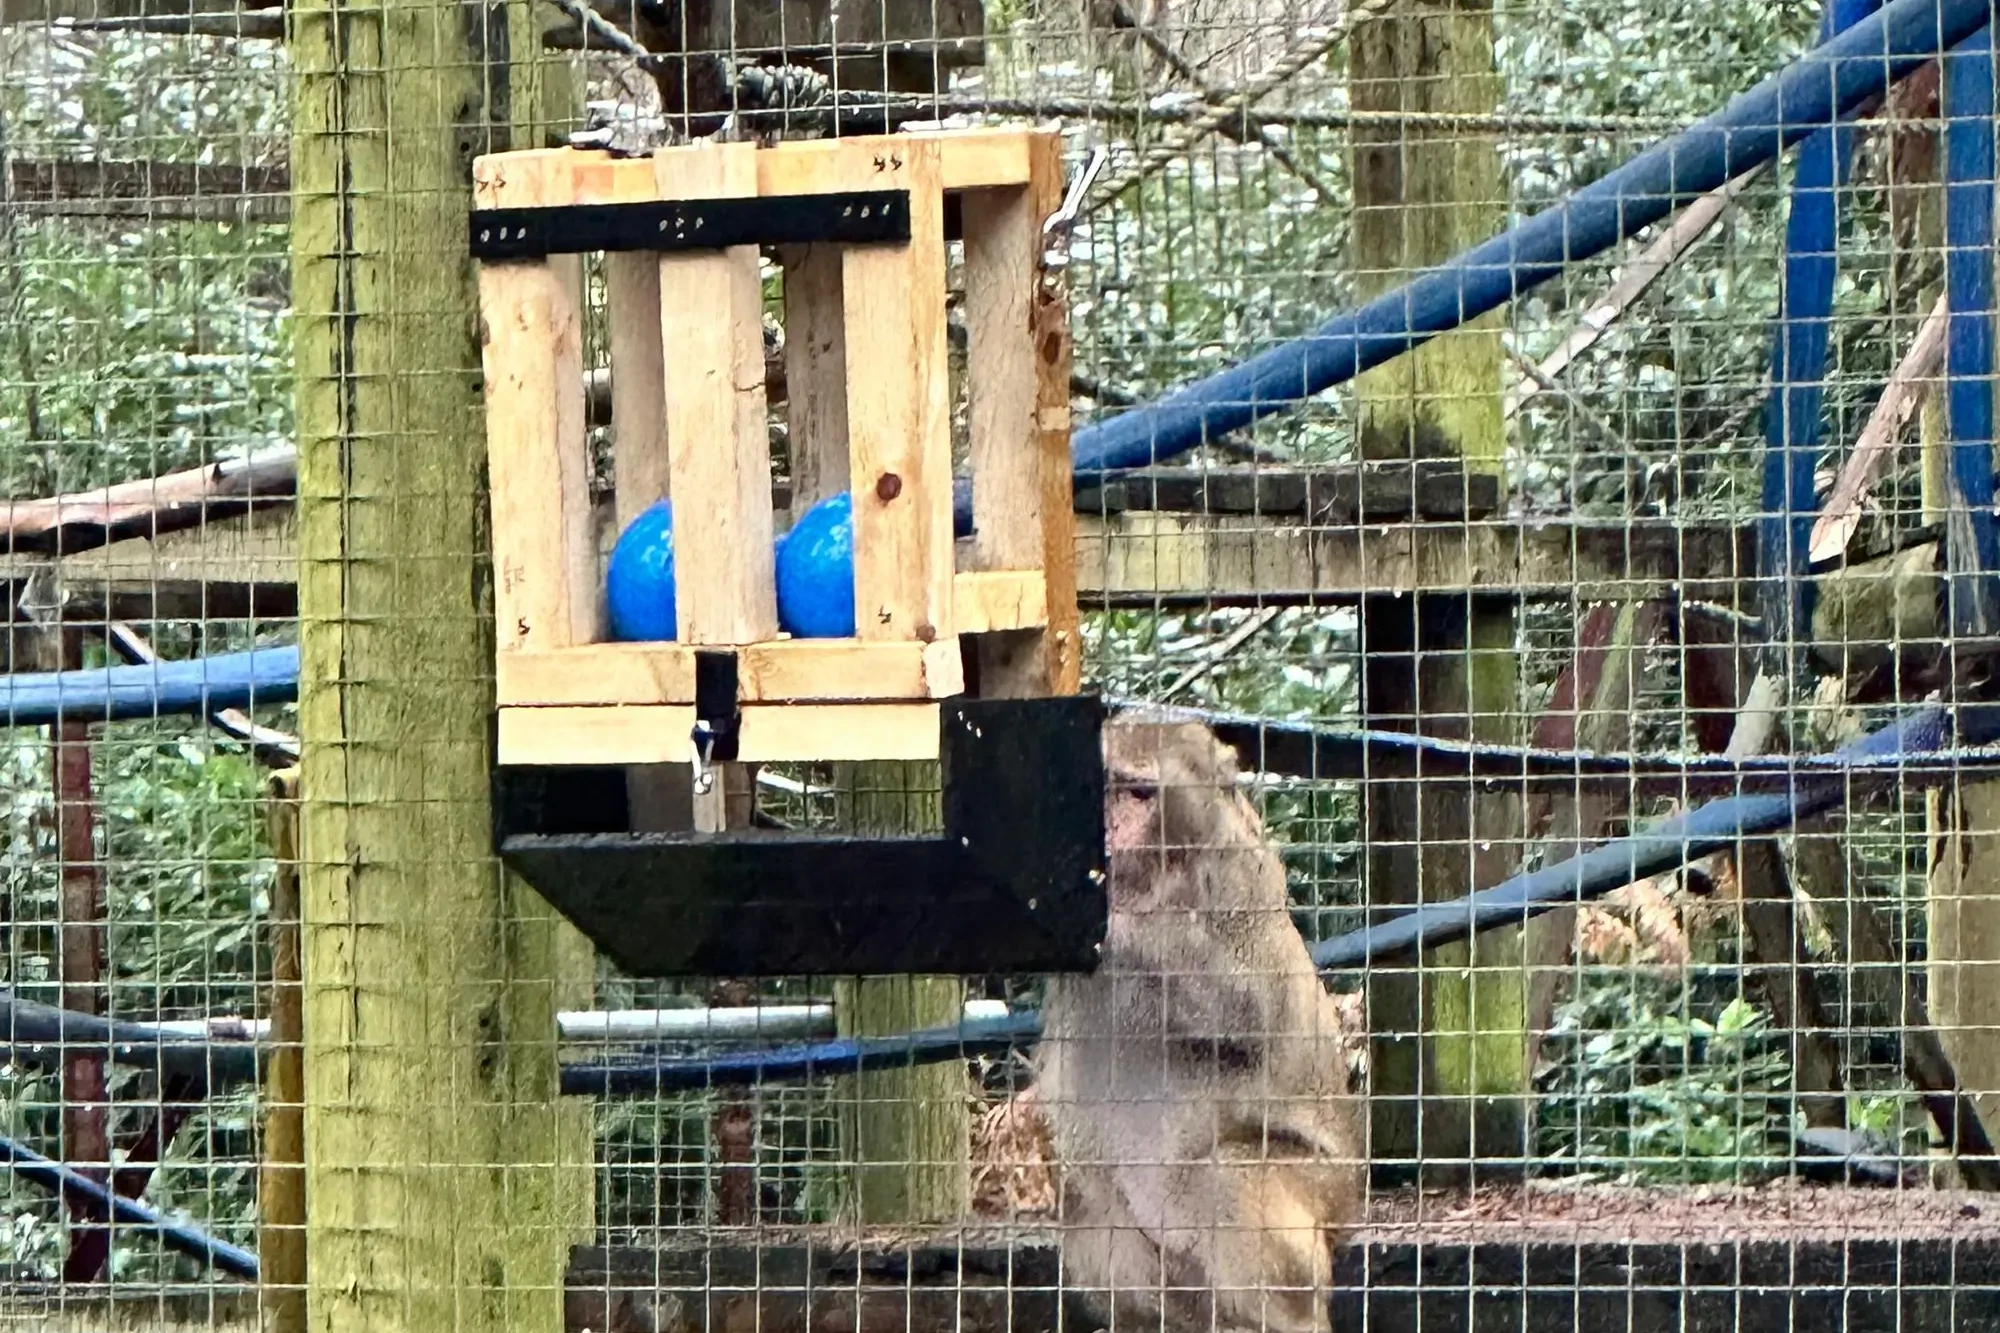 monkey using feeder built in paws for a cause charity team building activity